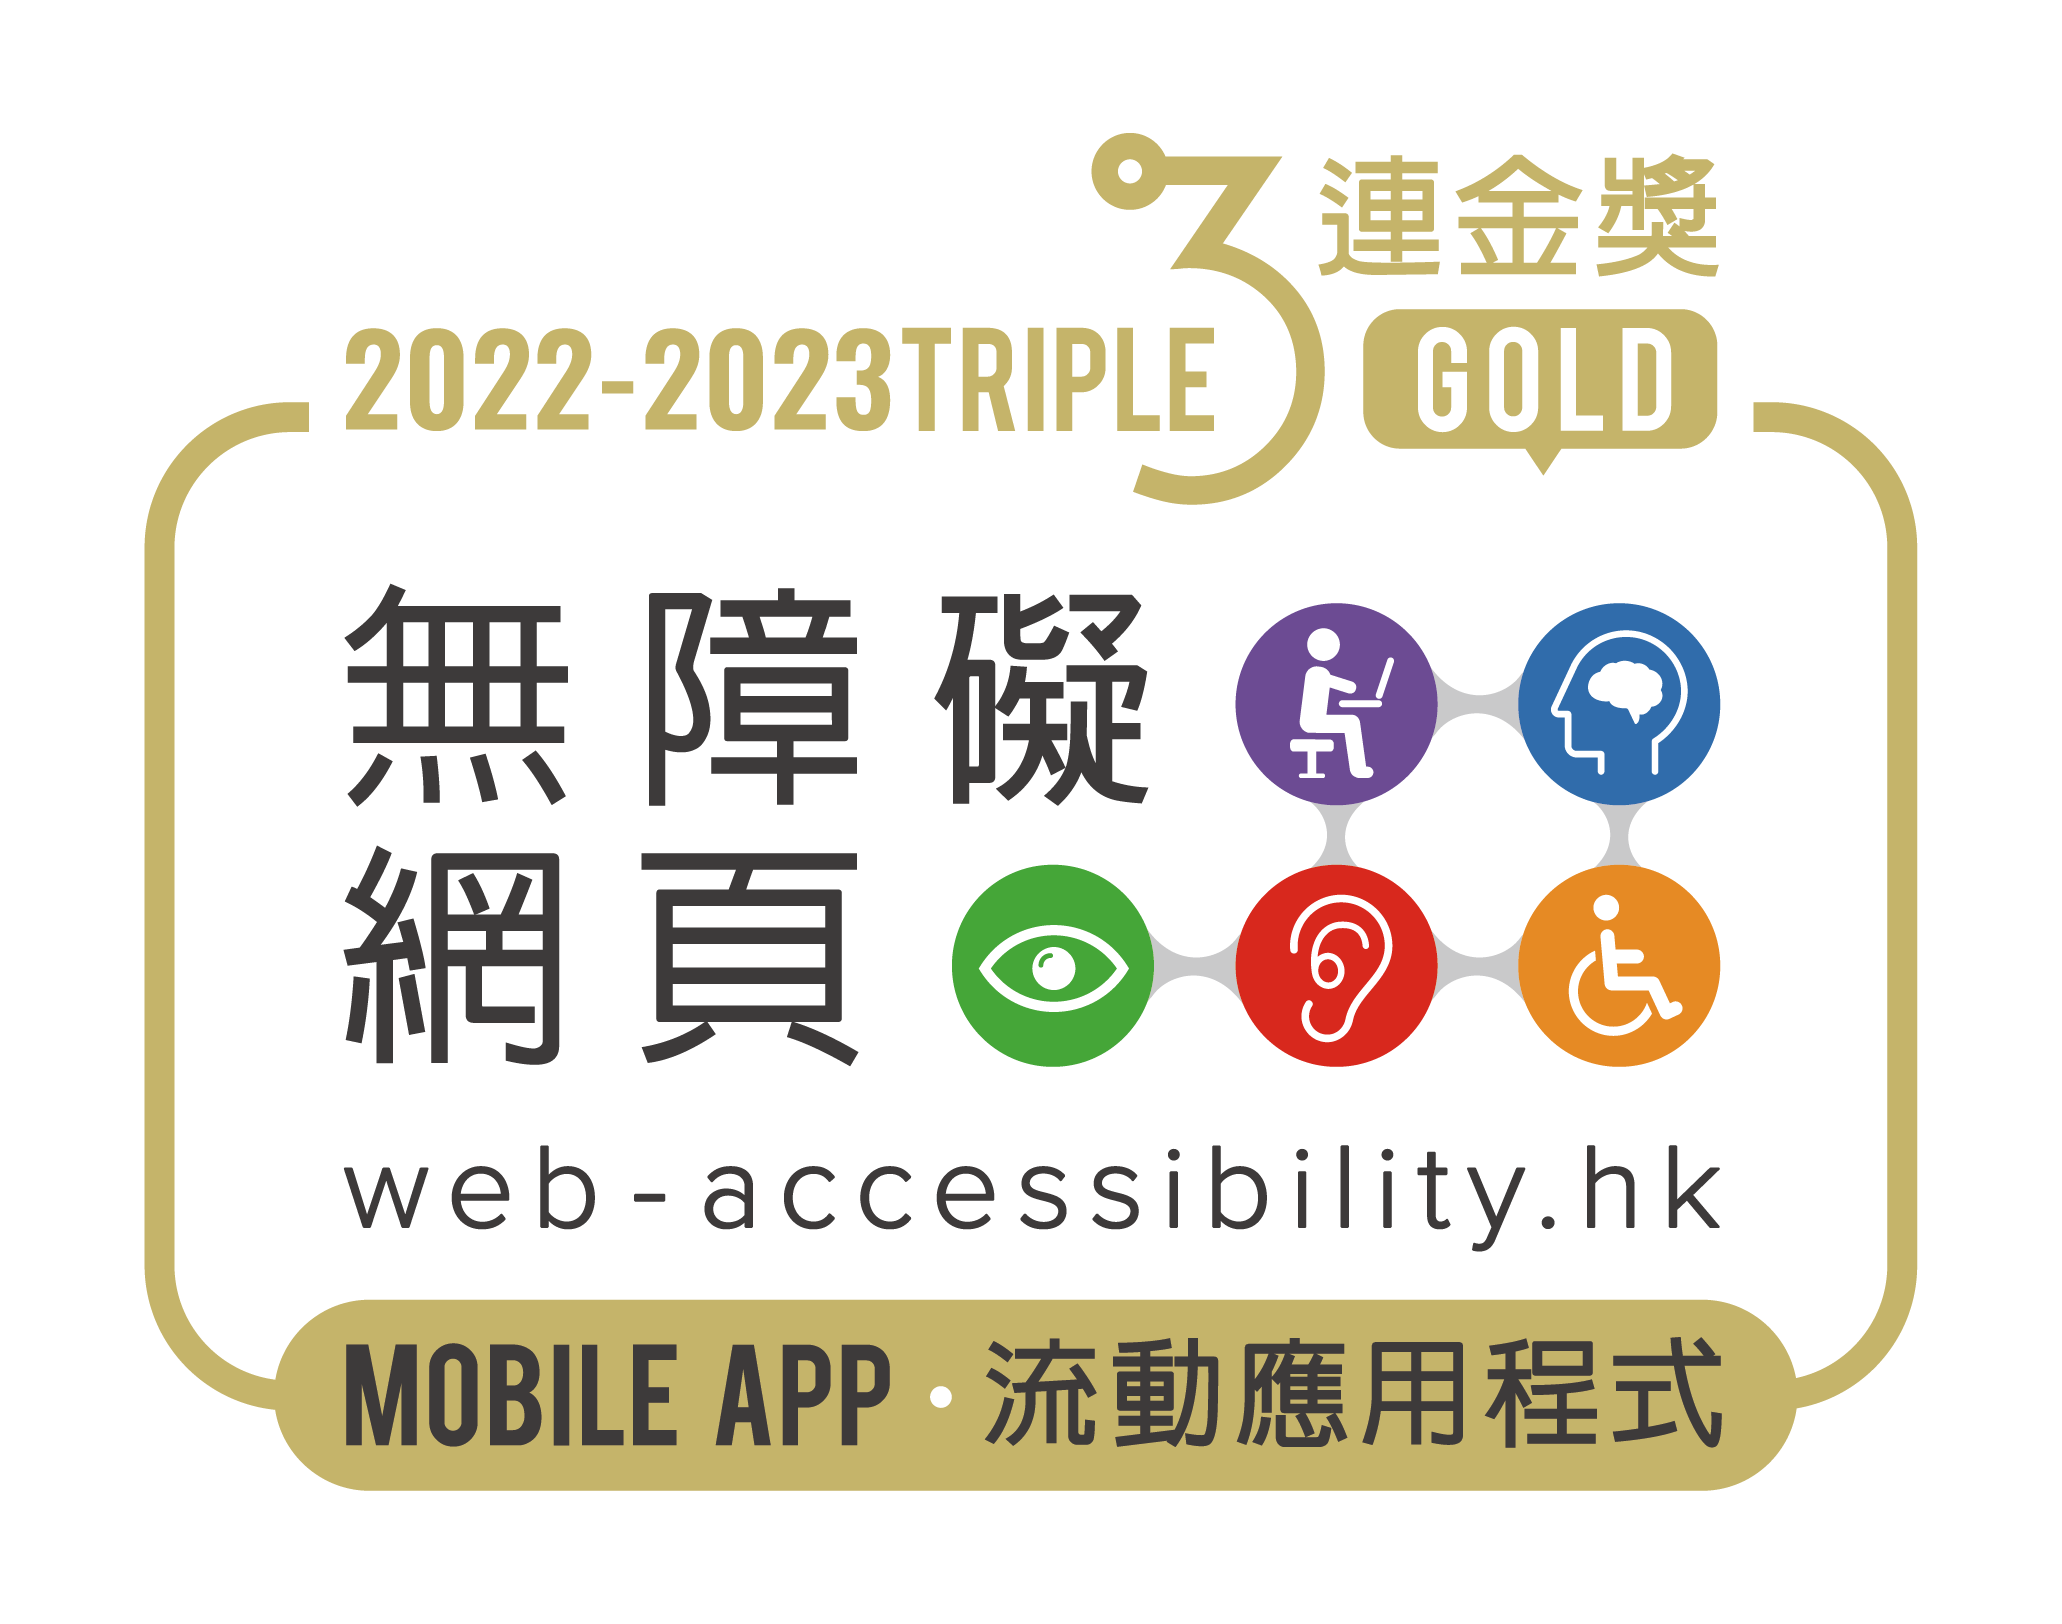 Triple Gold Award obtained in Web Accessibility Recognition Scheme 2022-2023